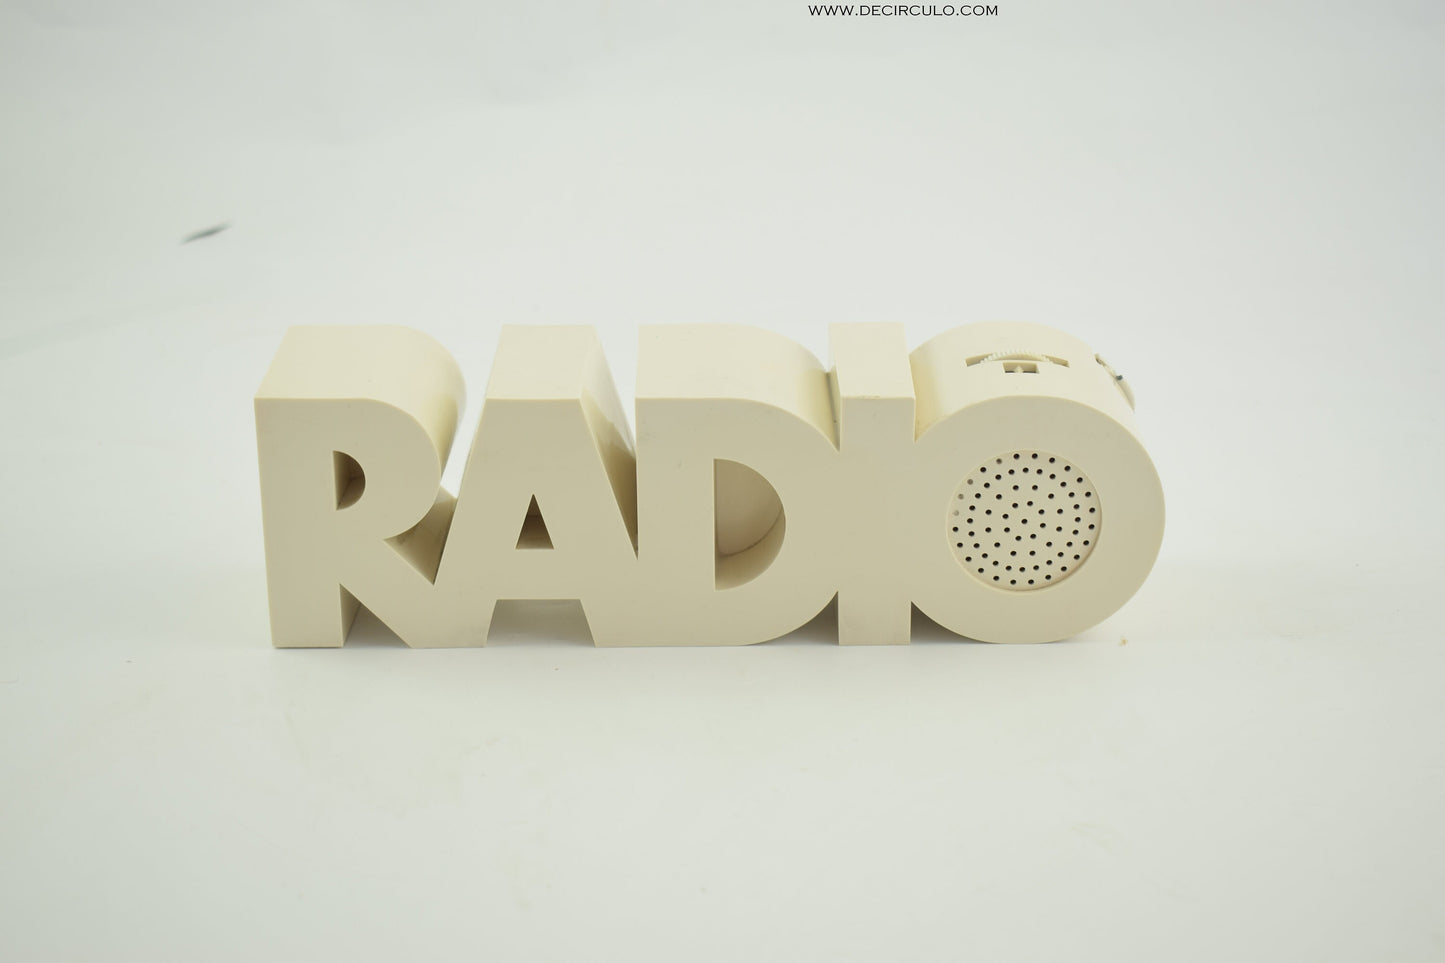 Radio radio Model in the form of the word radio UKW and MW frequency